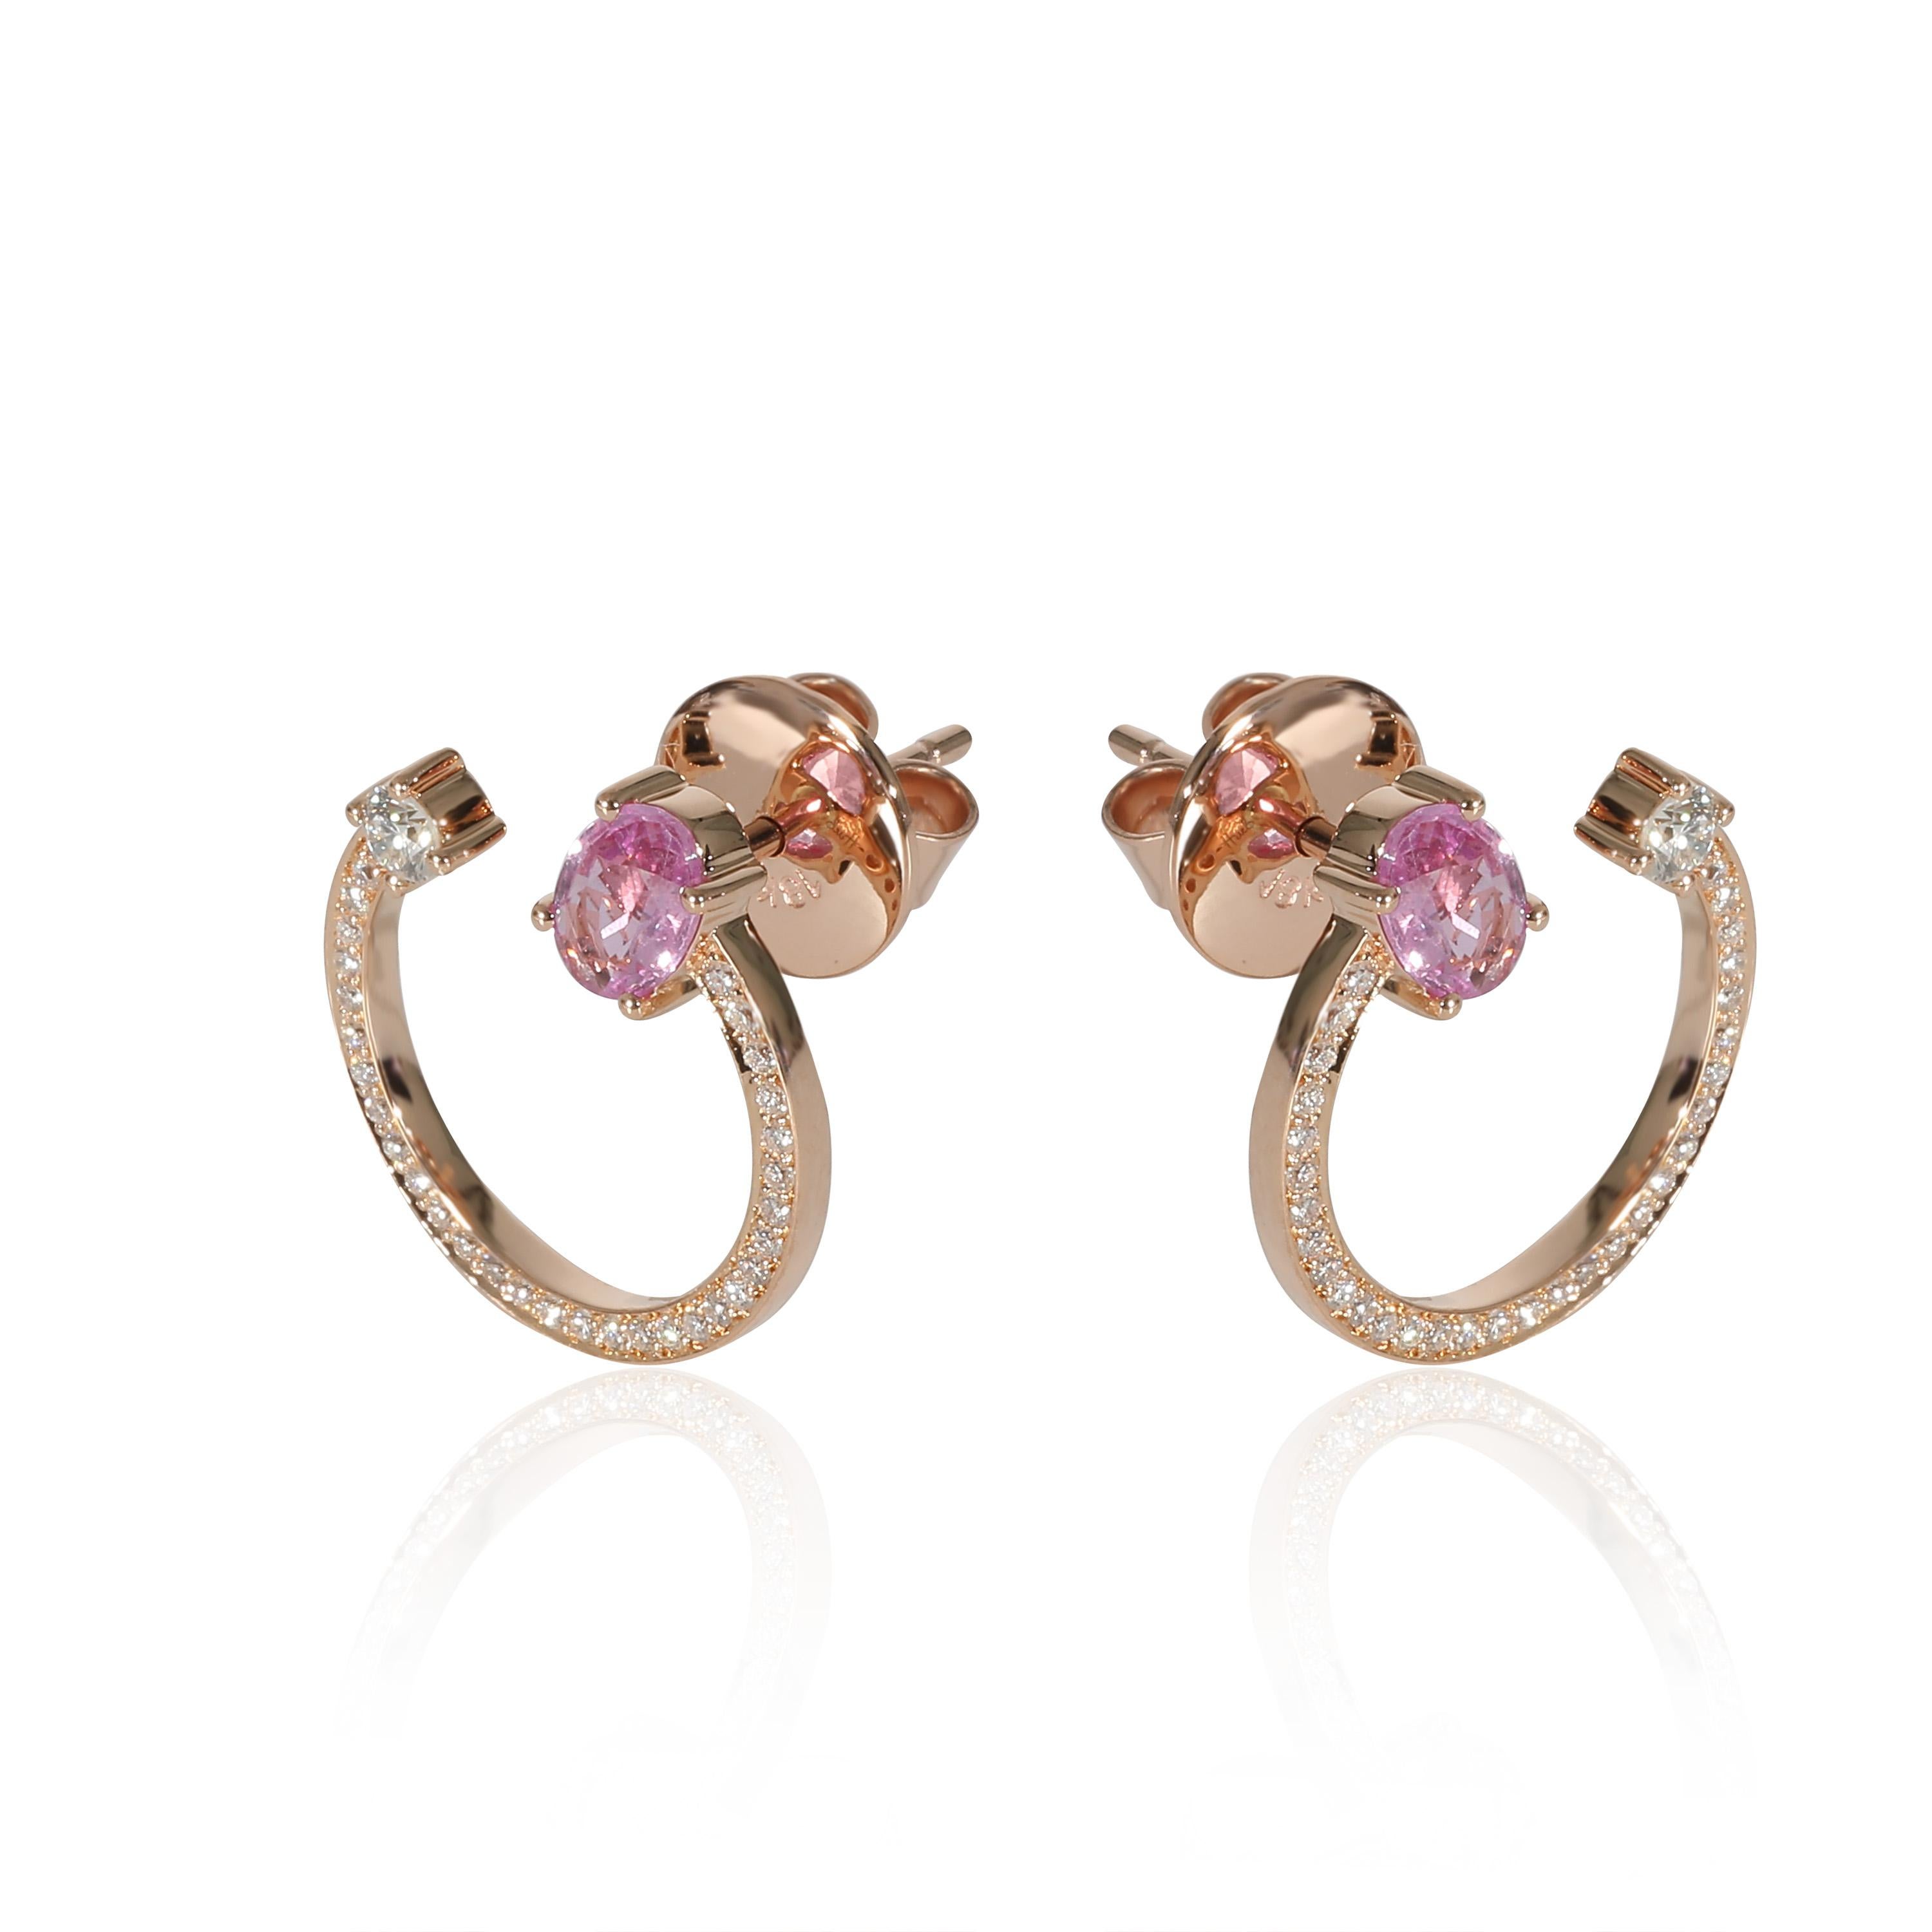 HUEB Spectrum Pink Sapphire & Diamond Earrings in 18k Rose Gold 0.39 CTW In Excellent Condition For Sale In New York, NY